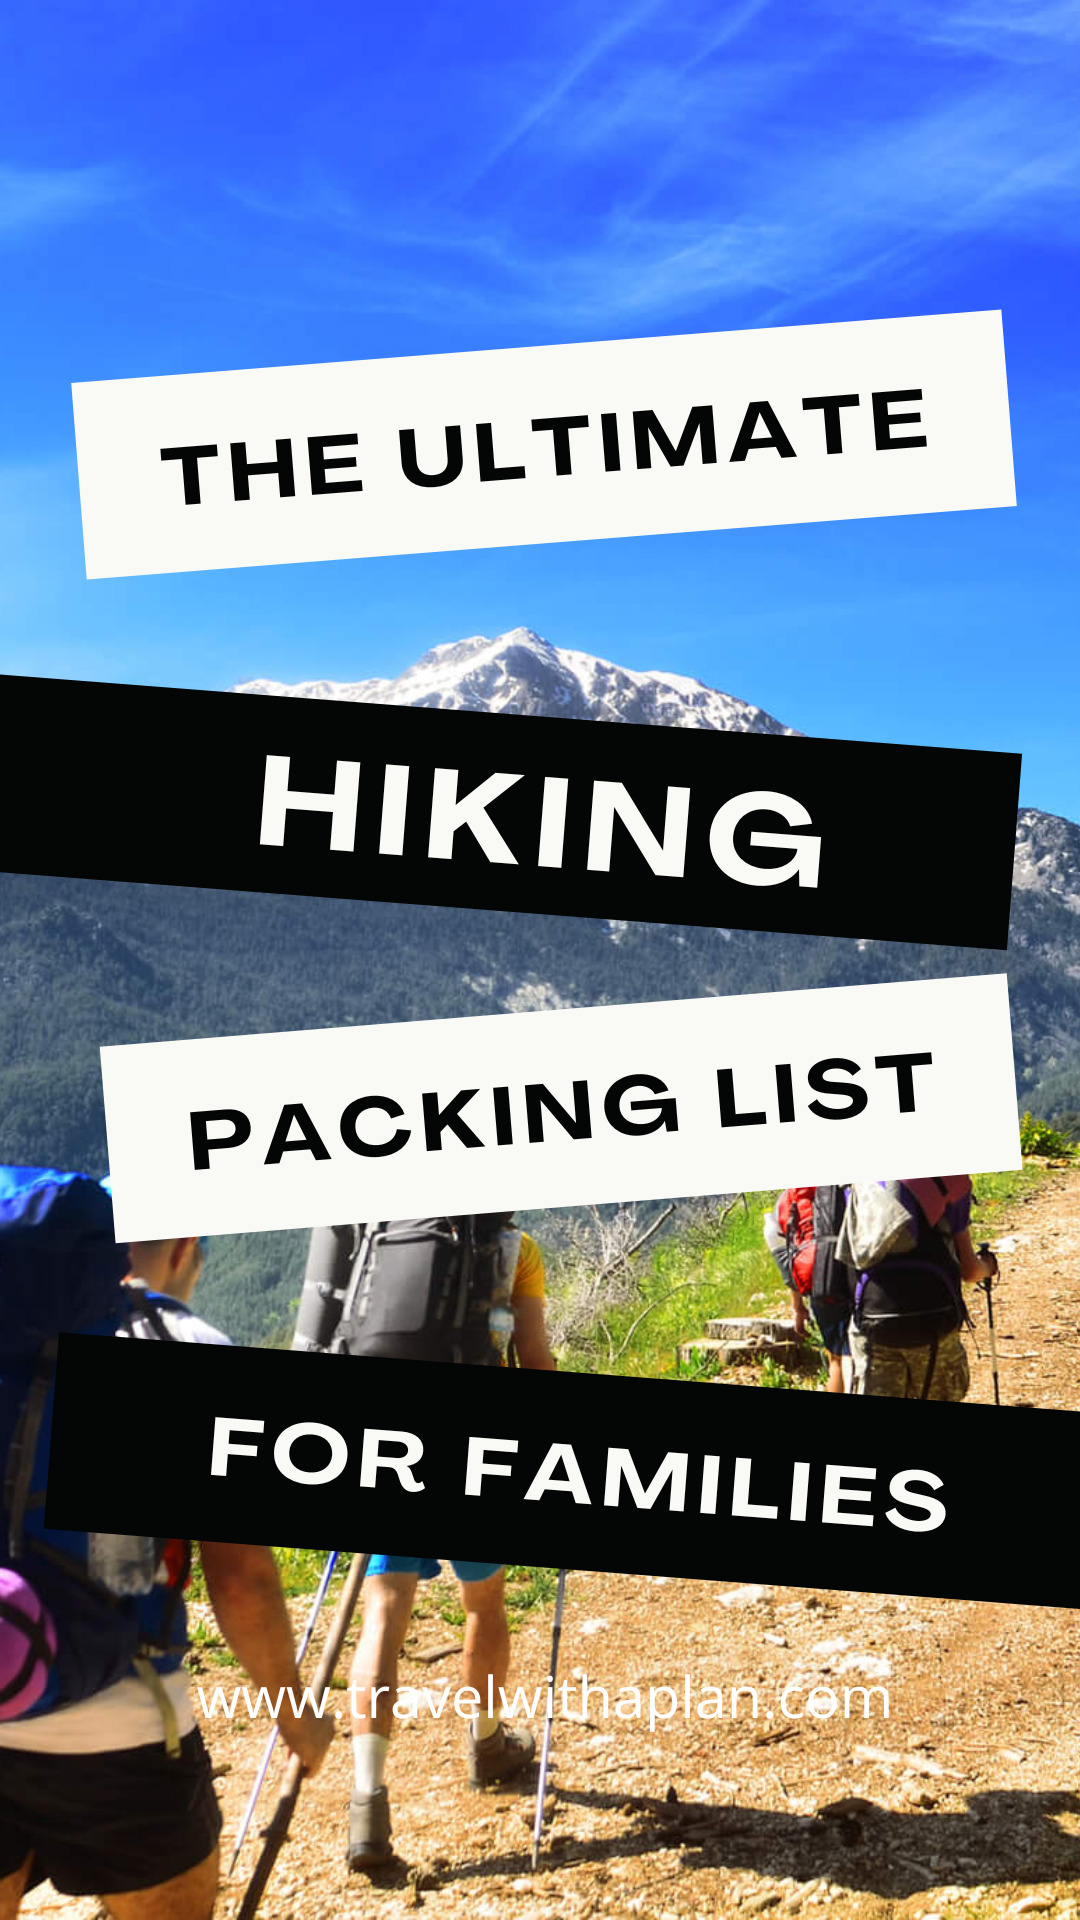 Check out our complete family hiking packing list before you head out on your next trail!